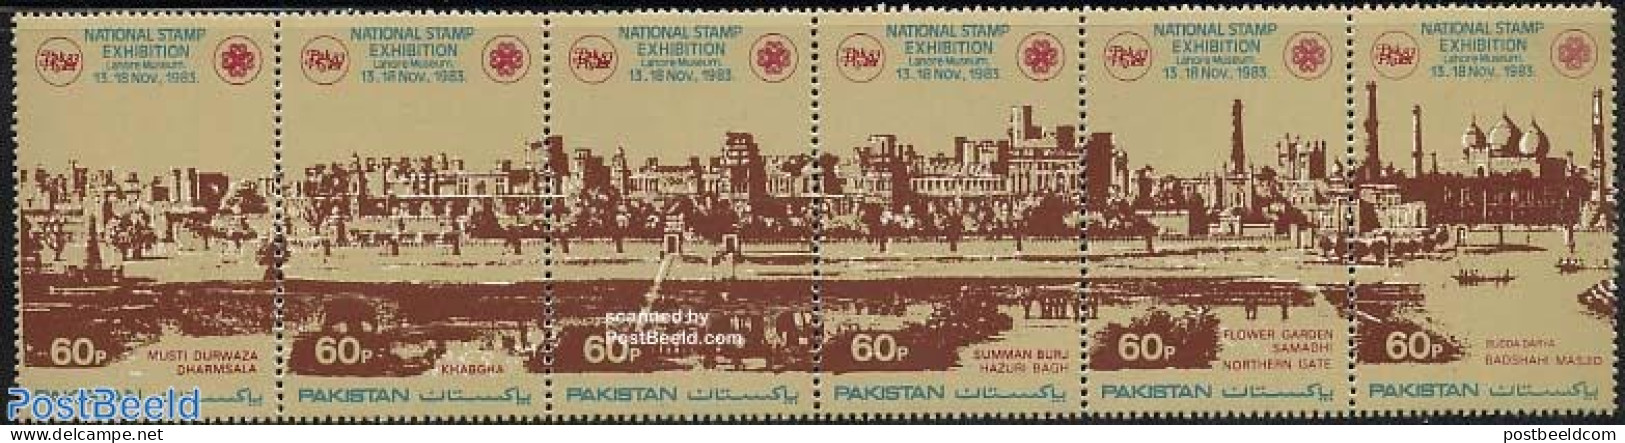 Pakistan 1983 National Stamp Exhibition 6v [:::::], Mint NH, Science - Int. Communication Year 1983 - Philately - Telekom